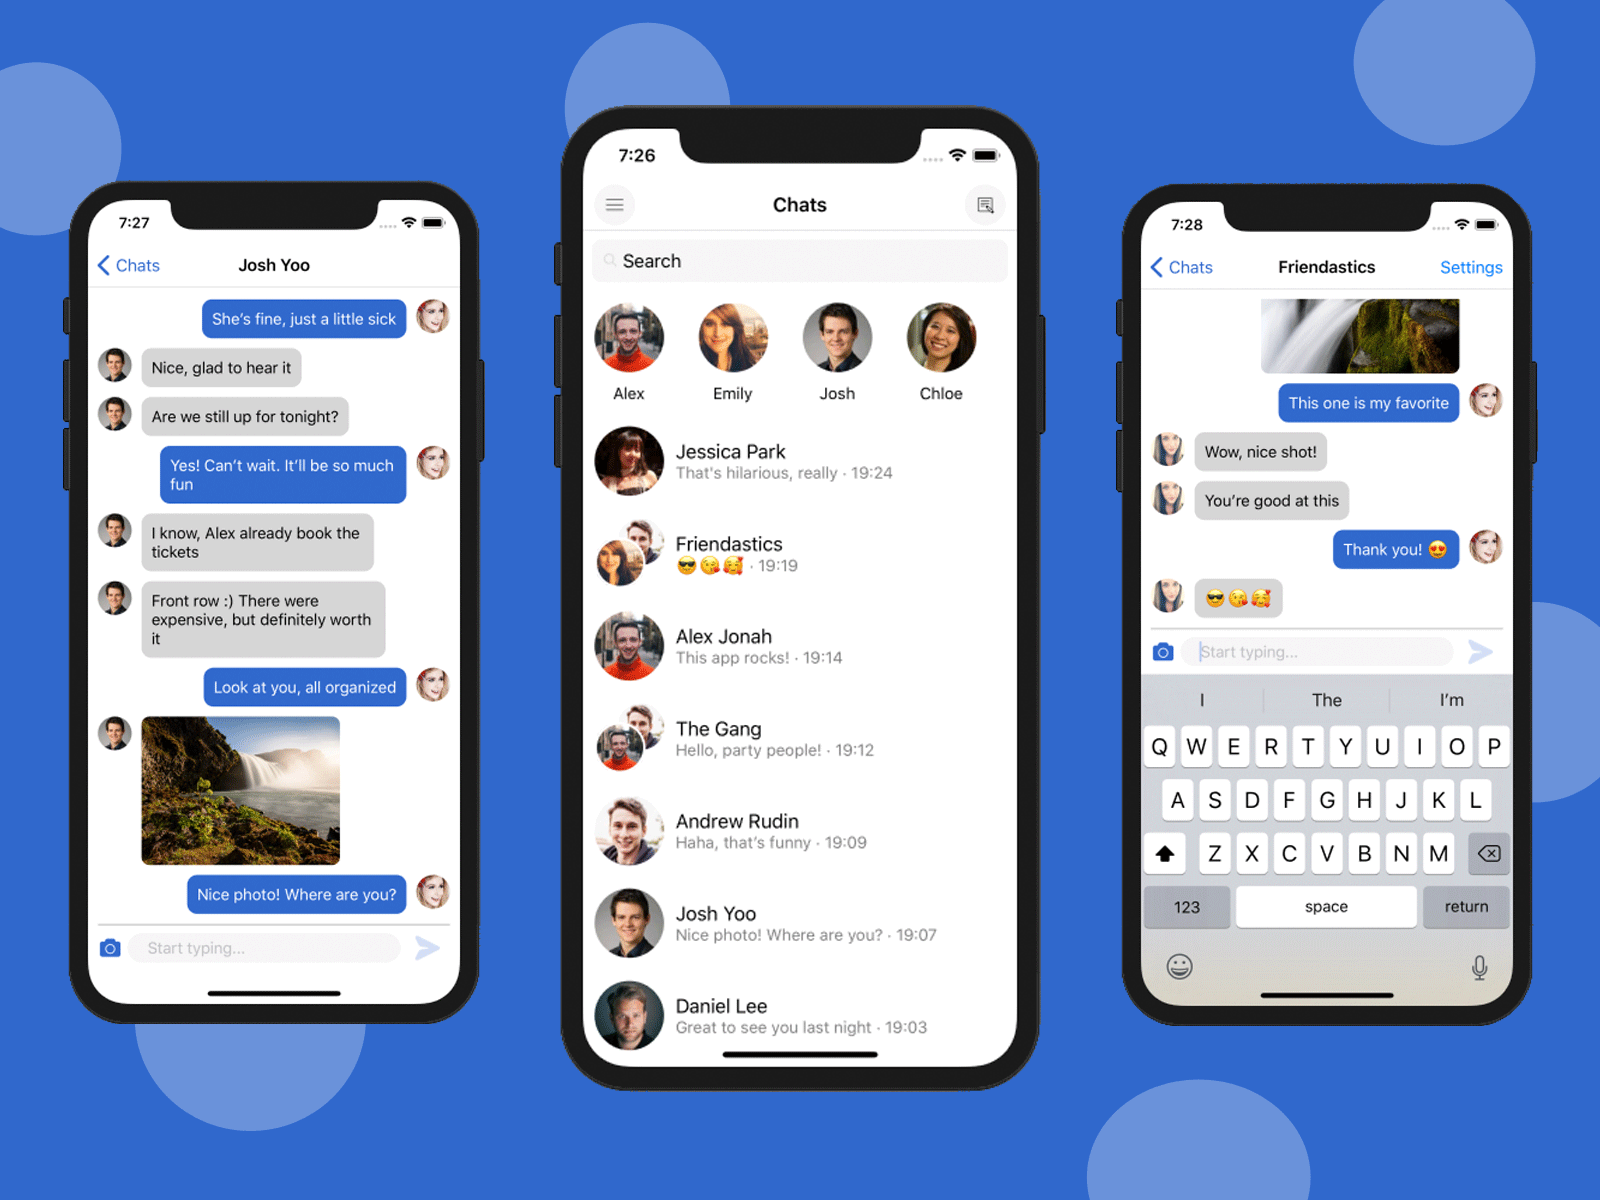 react-native-chat-app-template-ui-kit-by-ios-app-templates-on-dribbble